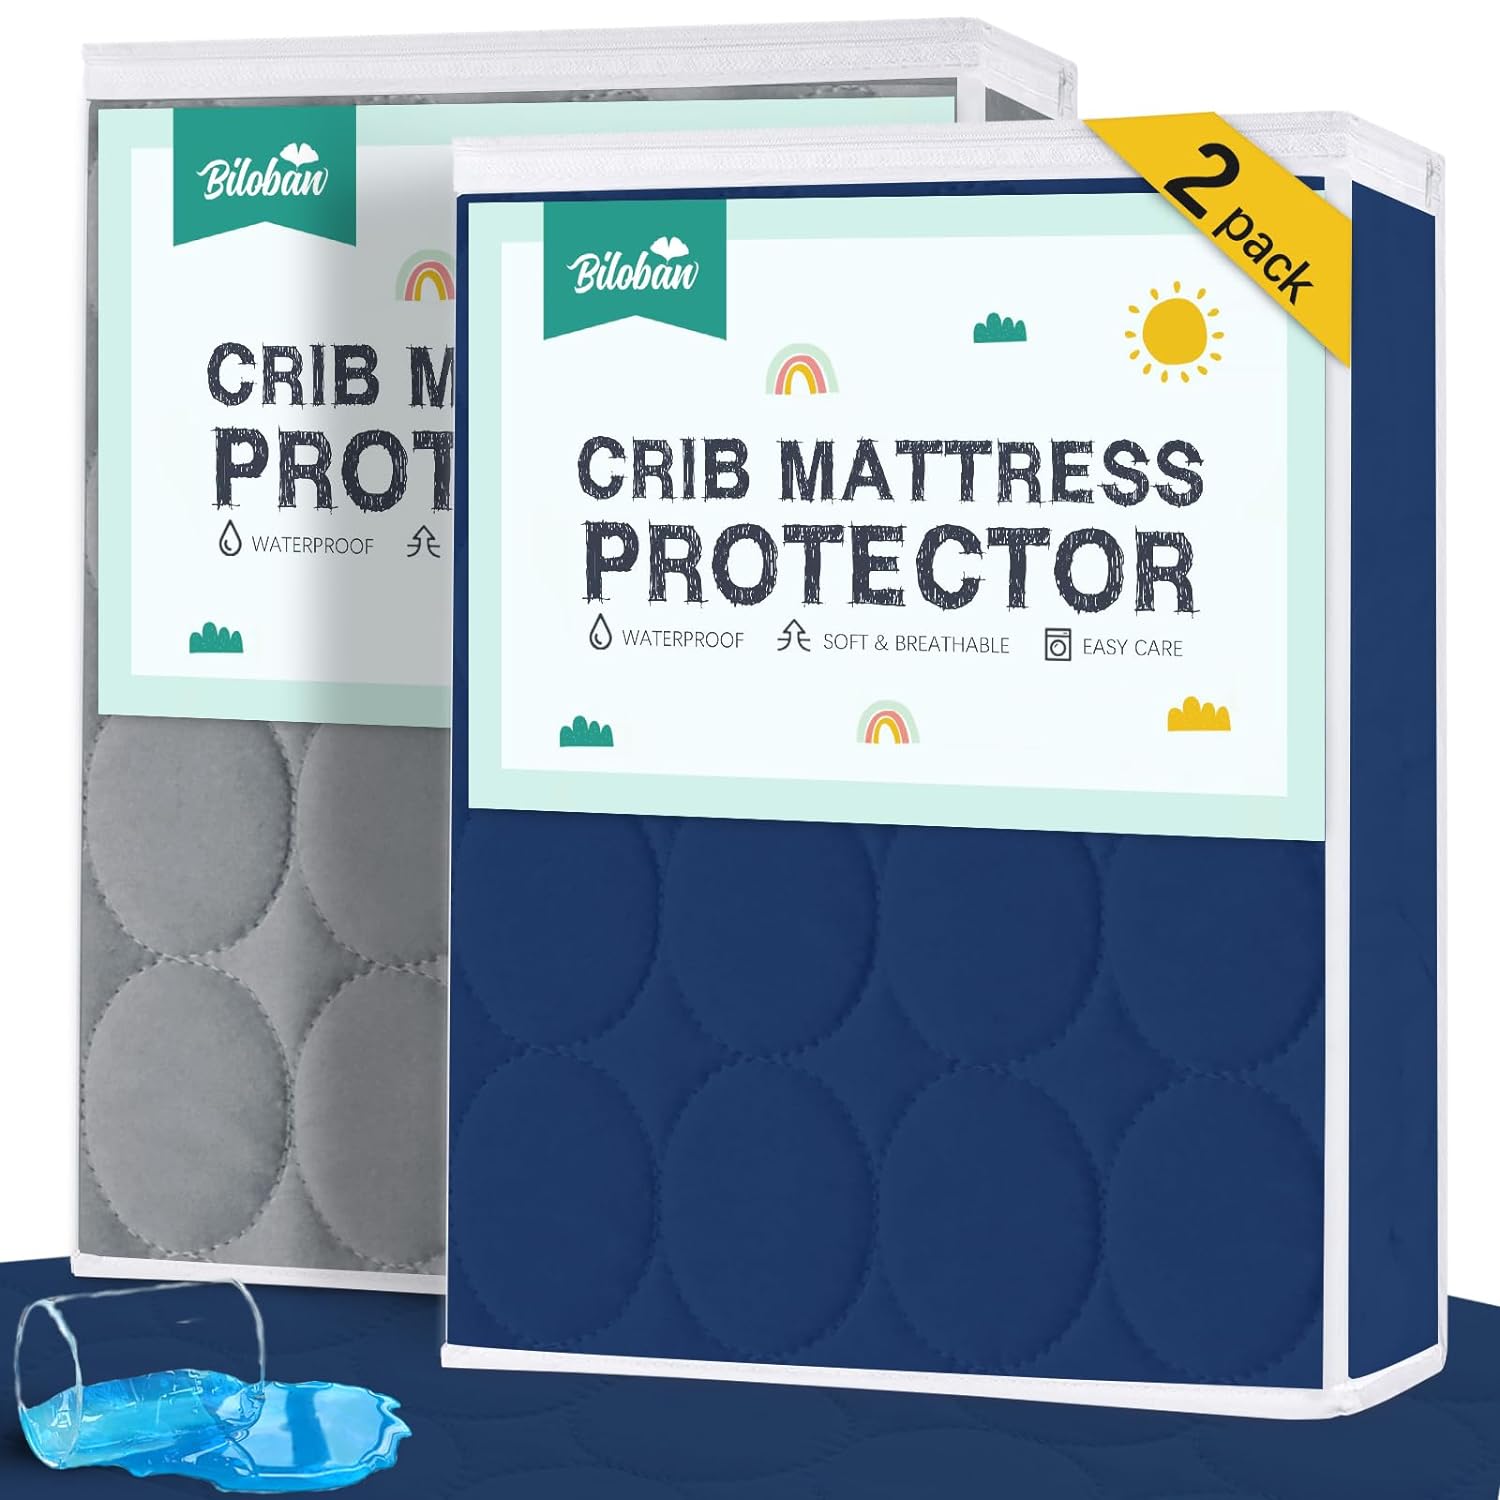 Crib Mattress Protector/ Pad Cover - 2 Pack, Quilted Microfiber, Waterproof (for Standard Crib/ Toddler Bed), Grey & Navy - Biloban Online Store